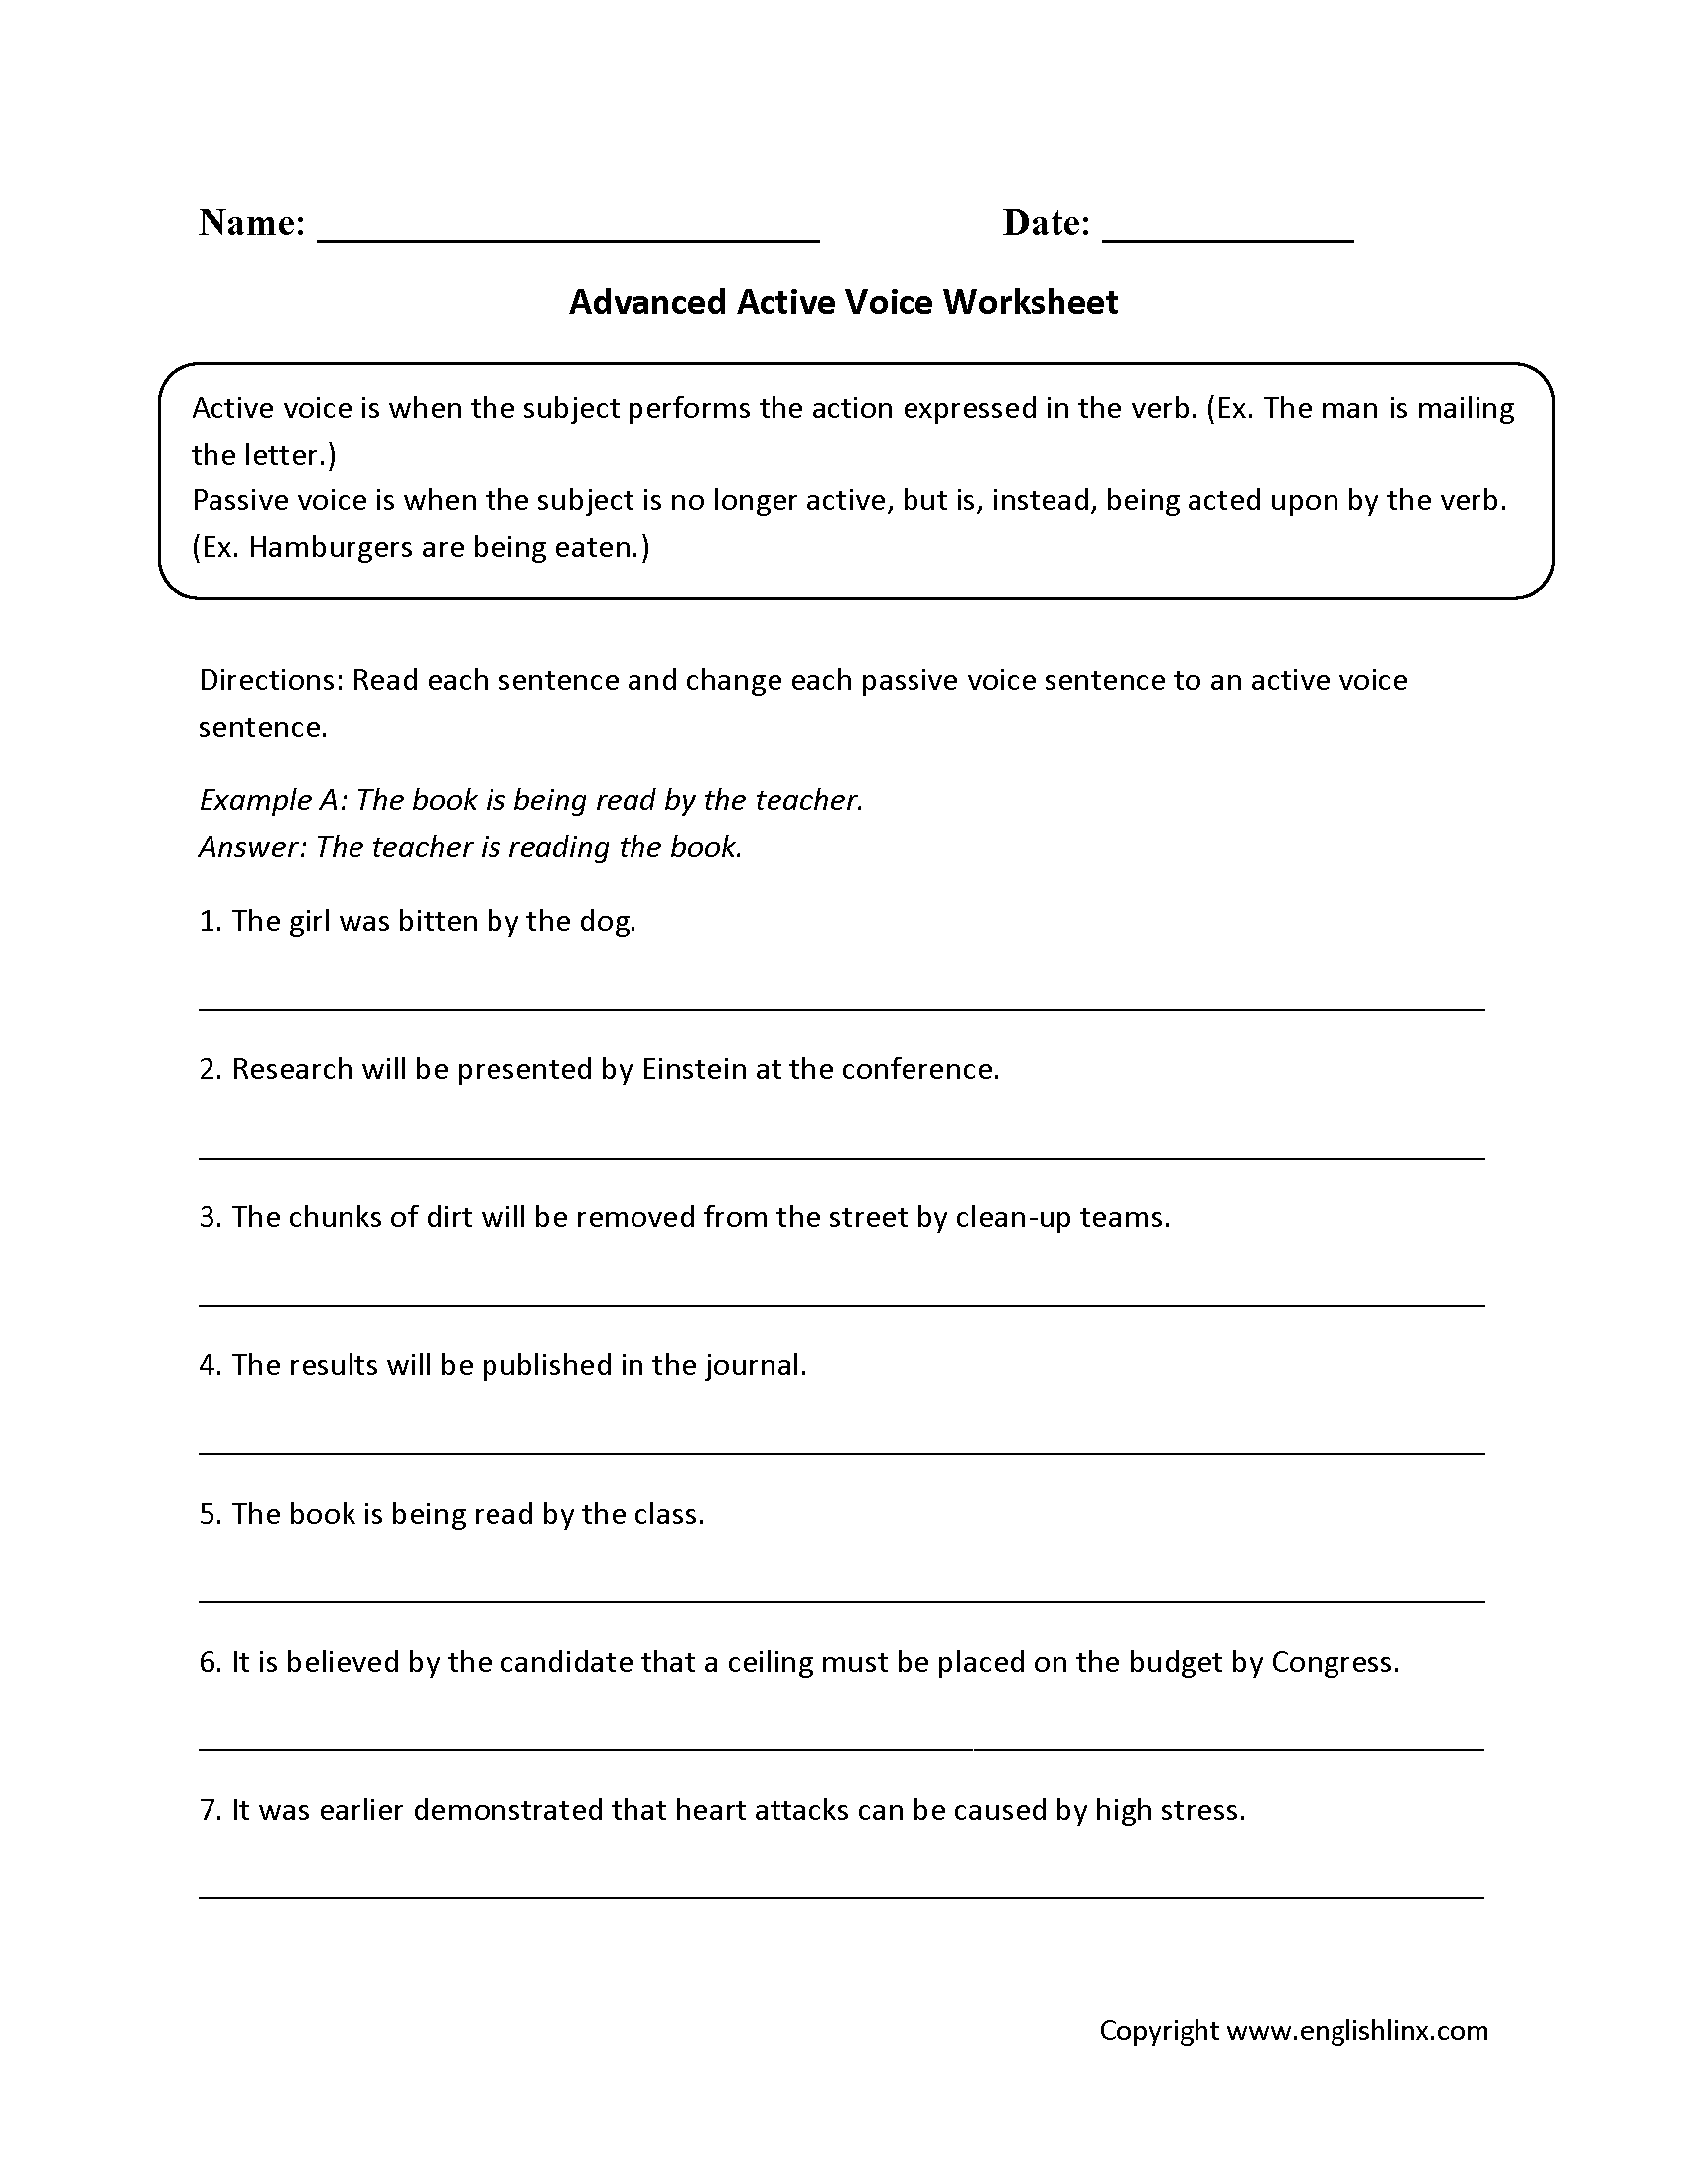 Advanced Active Voice Worksheets